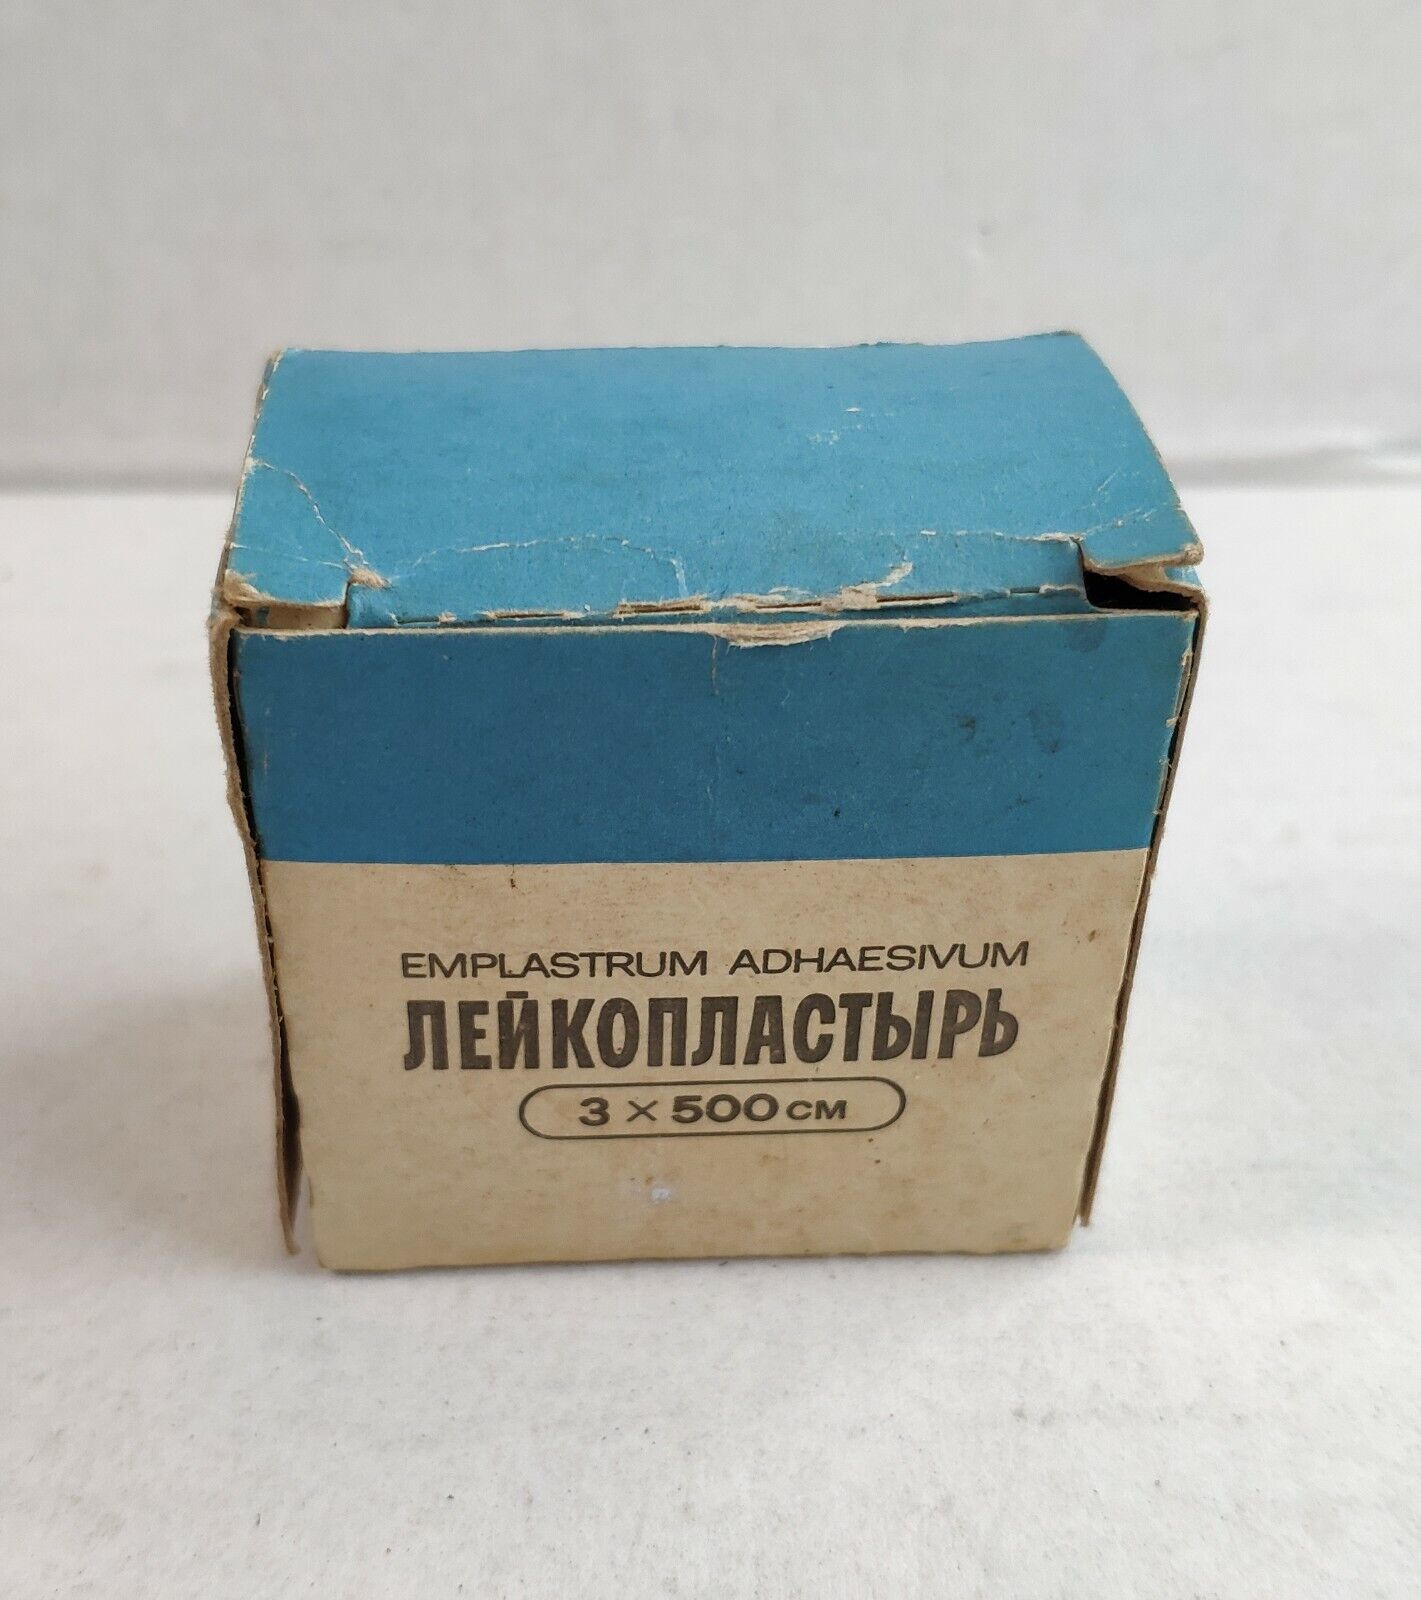 Vintage adhesive plaster of the USSR in the original box